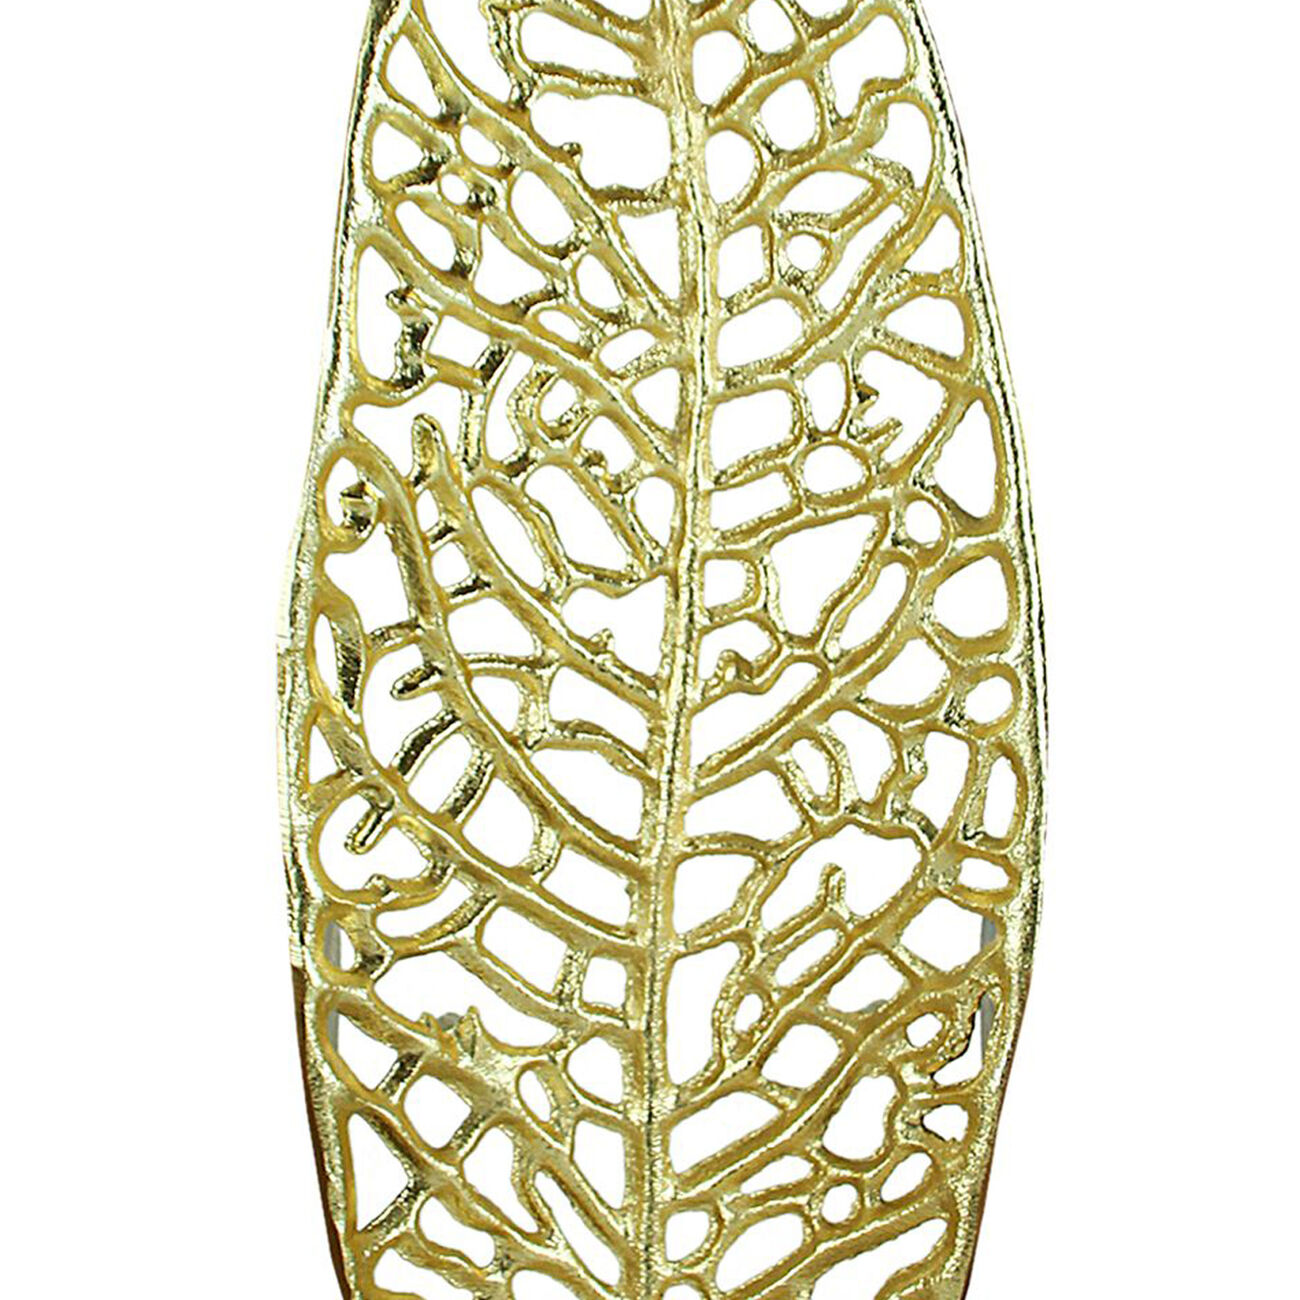 Metal Decorative Leaf Tray with Cut Out Vein Design, Gold